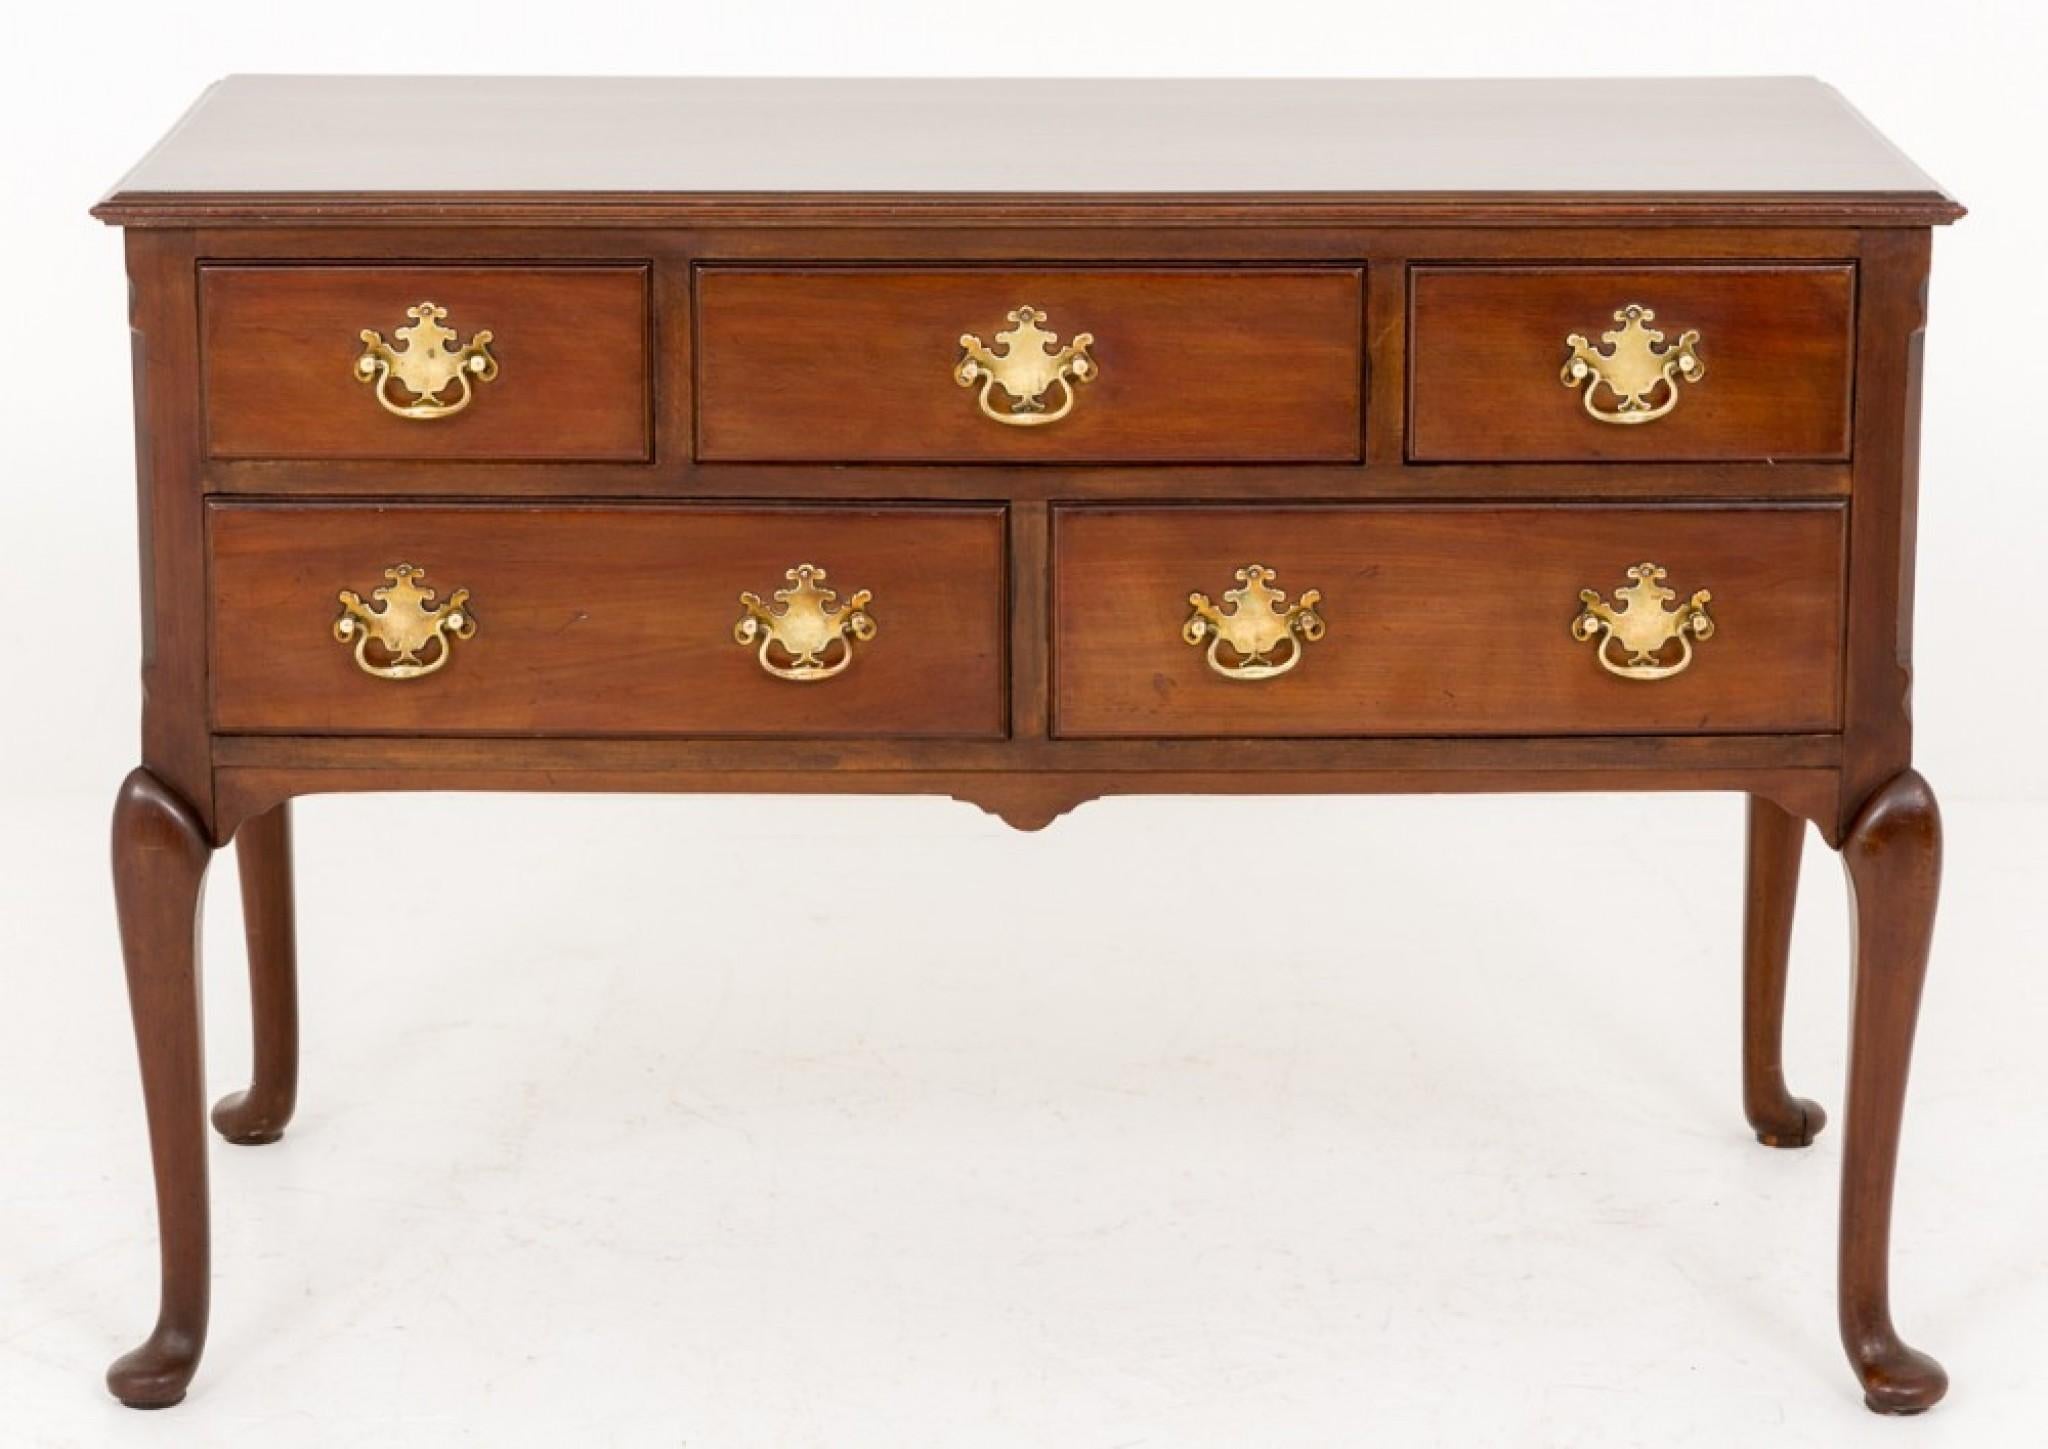 Late 19th Century Queen Anne Lowboy, Mahogany Chest Sideboard 1880